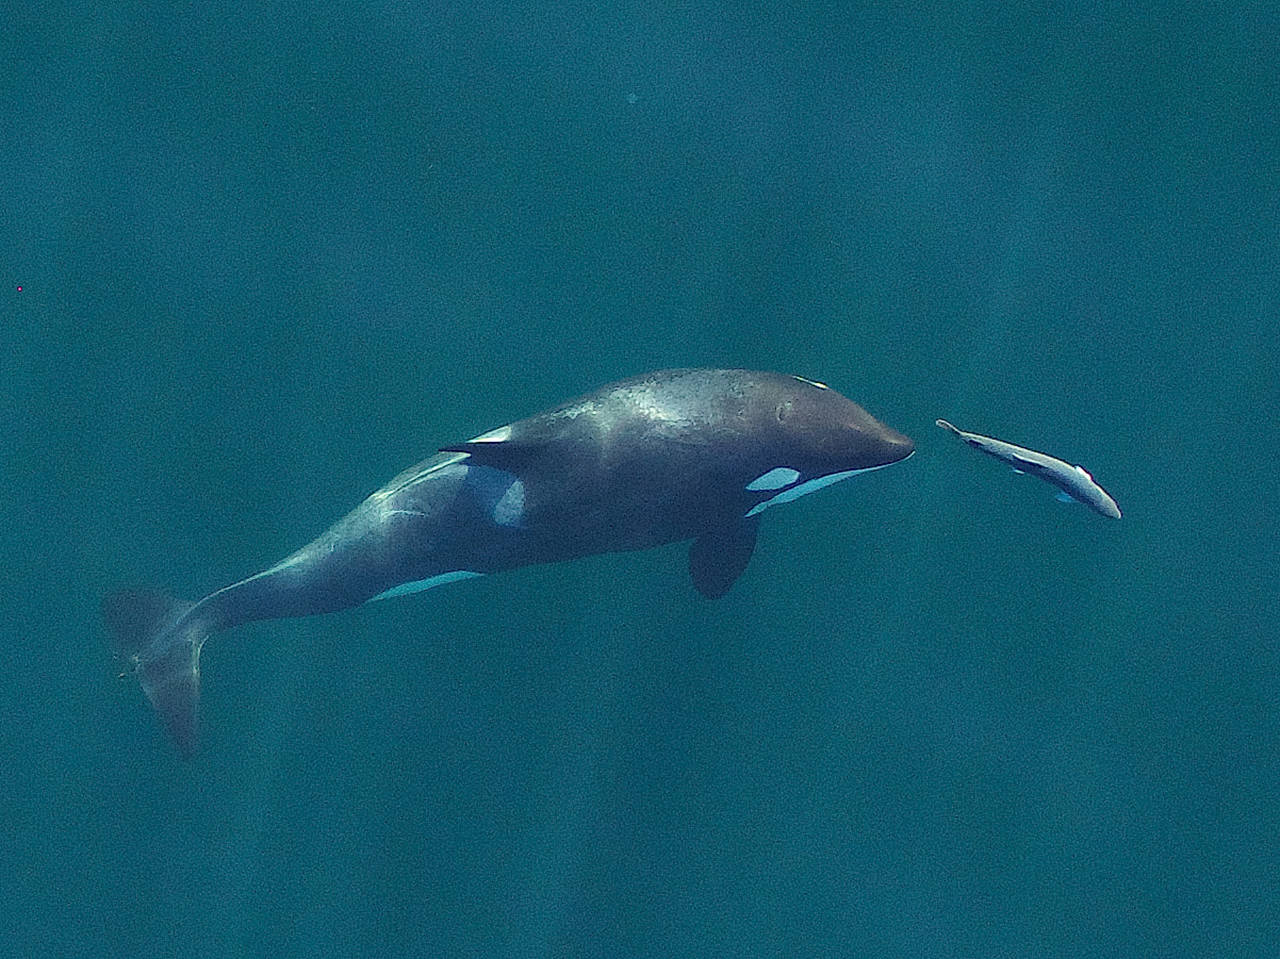 A young resident killer whale chases a chinook salmon in the Salish Sea near San Juan Island, in September 2017. Image obtained under NMFS permit #19091. Photograph by John Durban (NOAA Fisheries/Southwest Fisheries Science Center), Holly Fearnbach (SR3: SeaLife Response, Rehabilitation and Research) and Lance Barrett-Lennard (Vancouver Aquarium’s Coastal Ocean Research Institute).